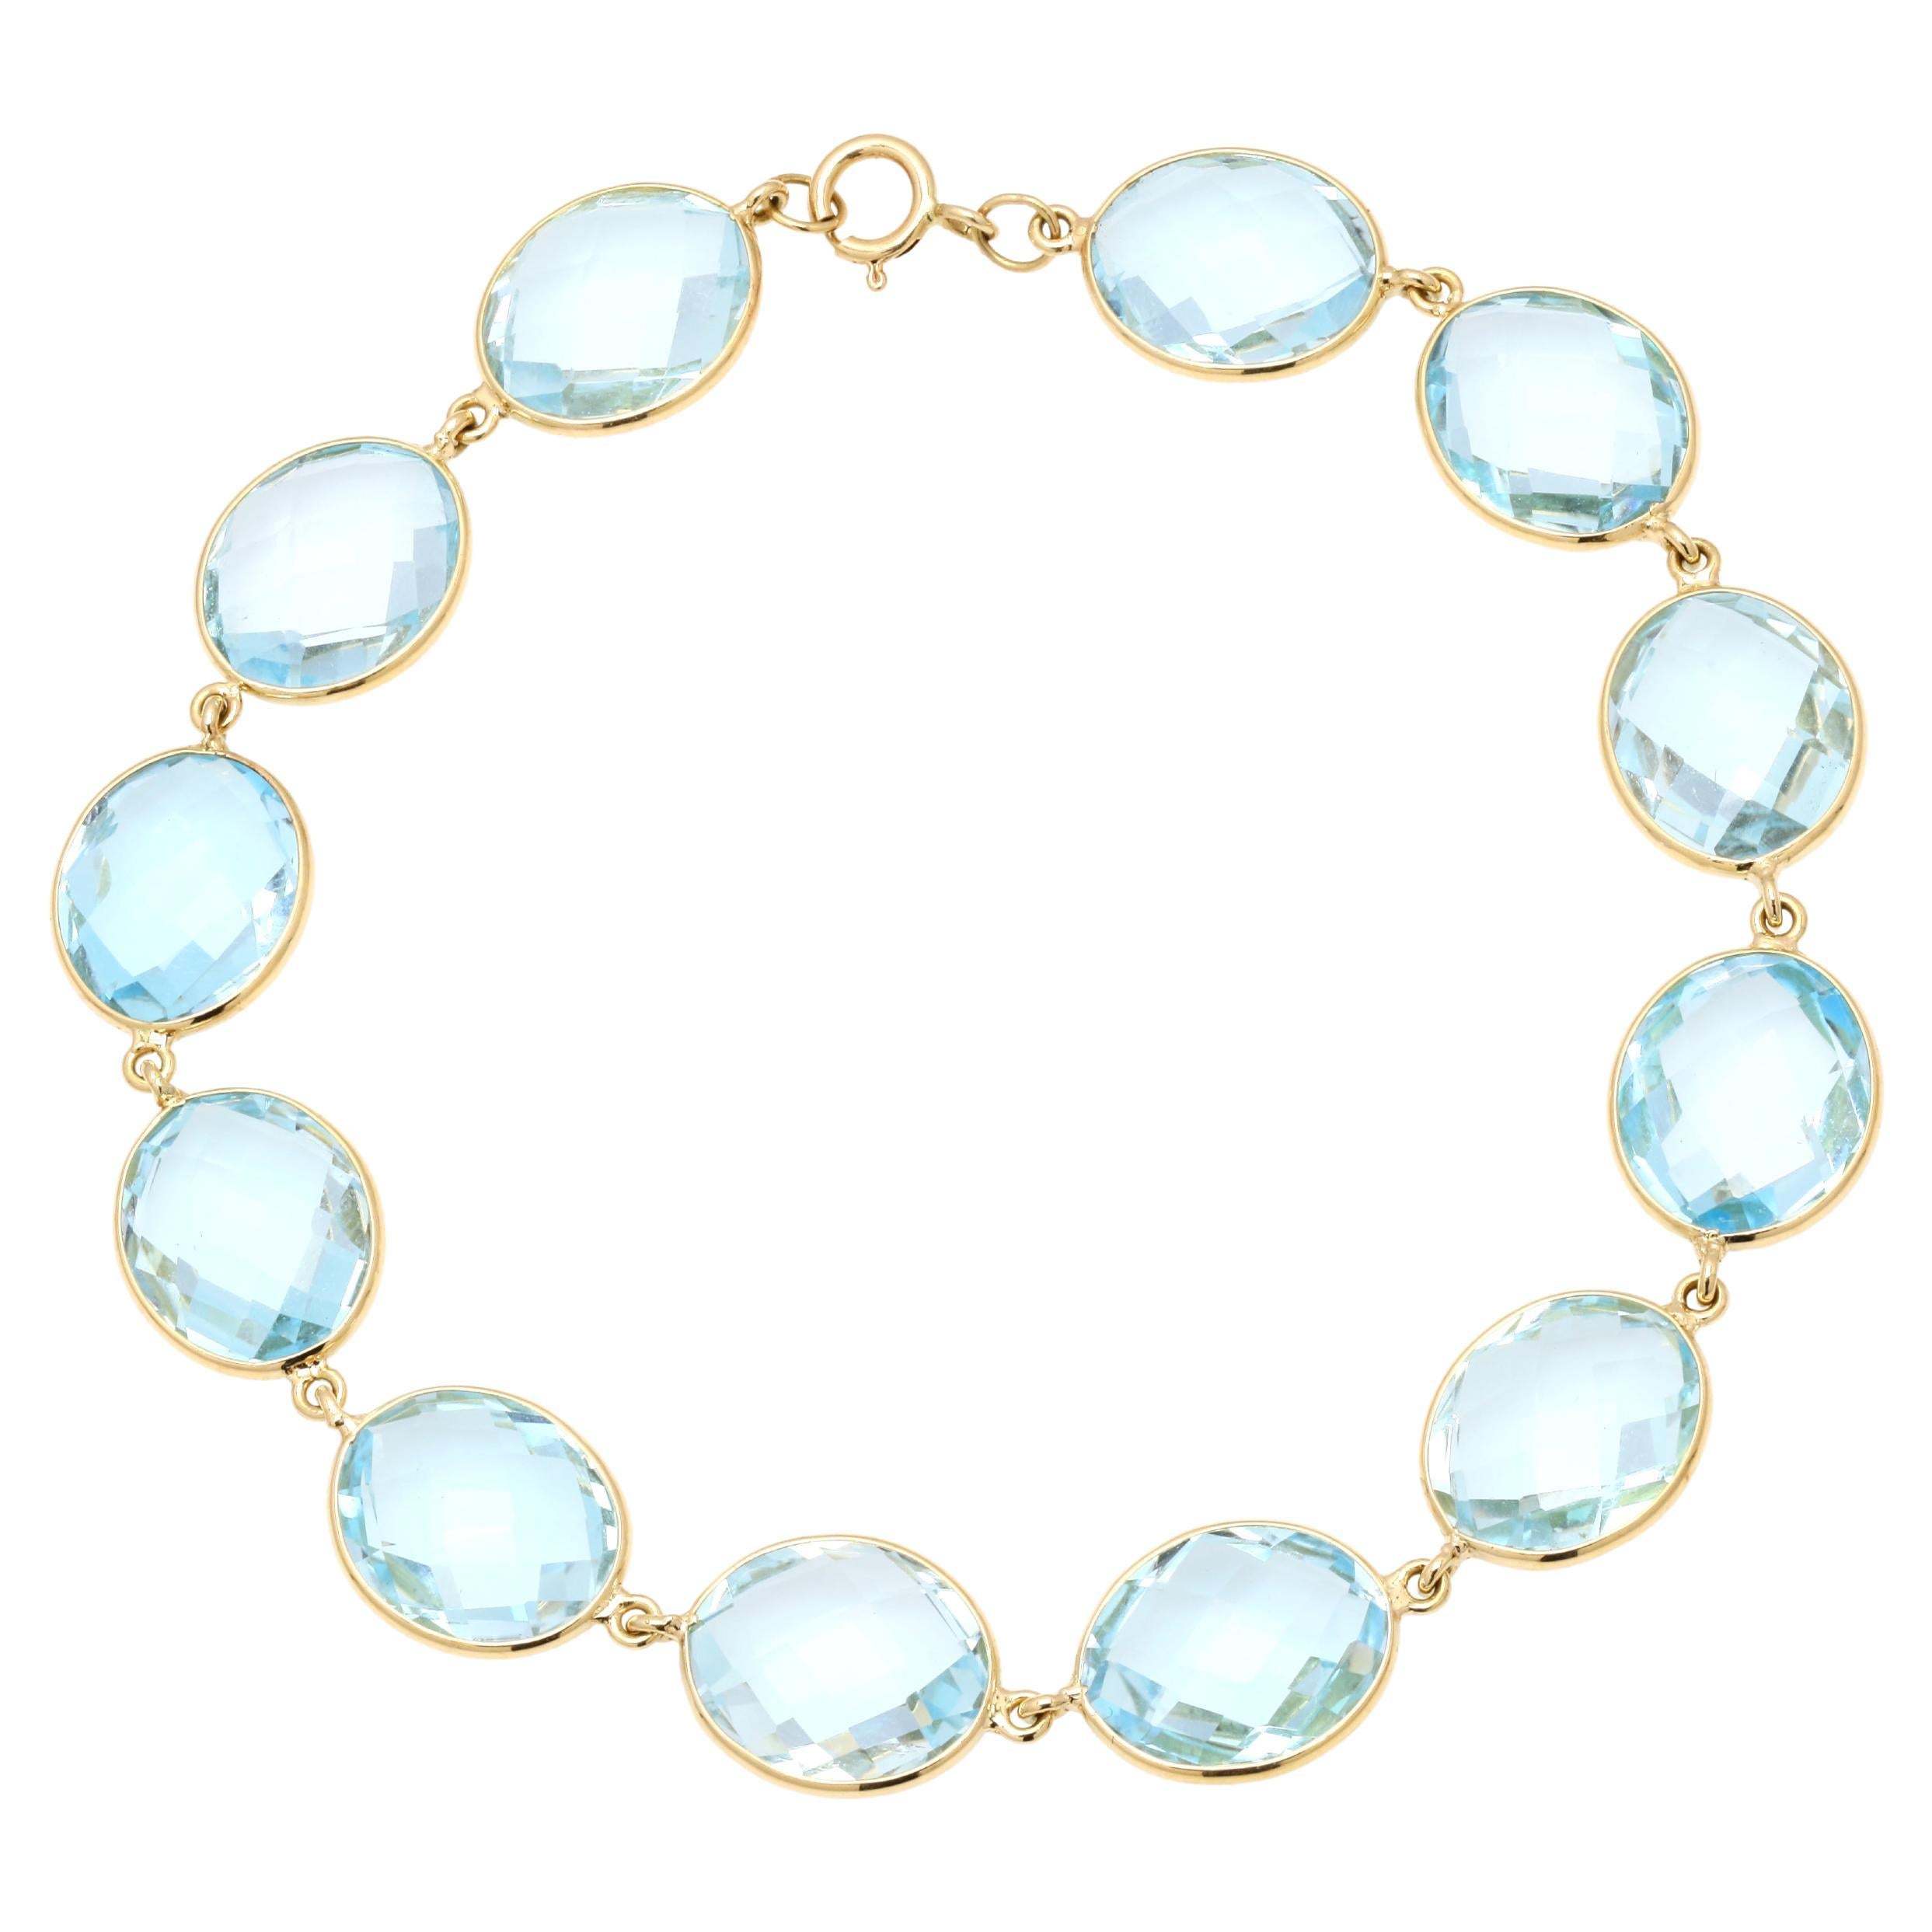 Translucent 41.7 ct Oval Blue Topaz Chain Bracelet in Solid 18K Yellow Gold For Sale